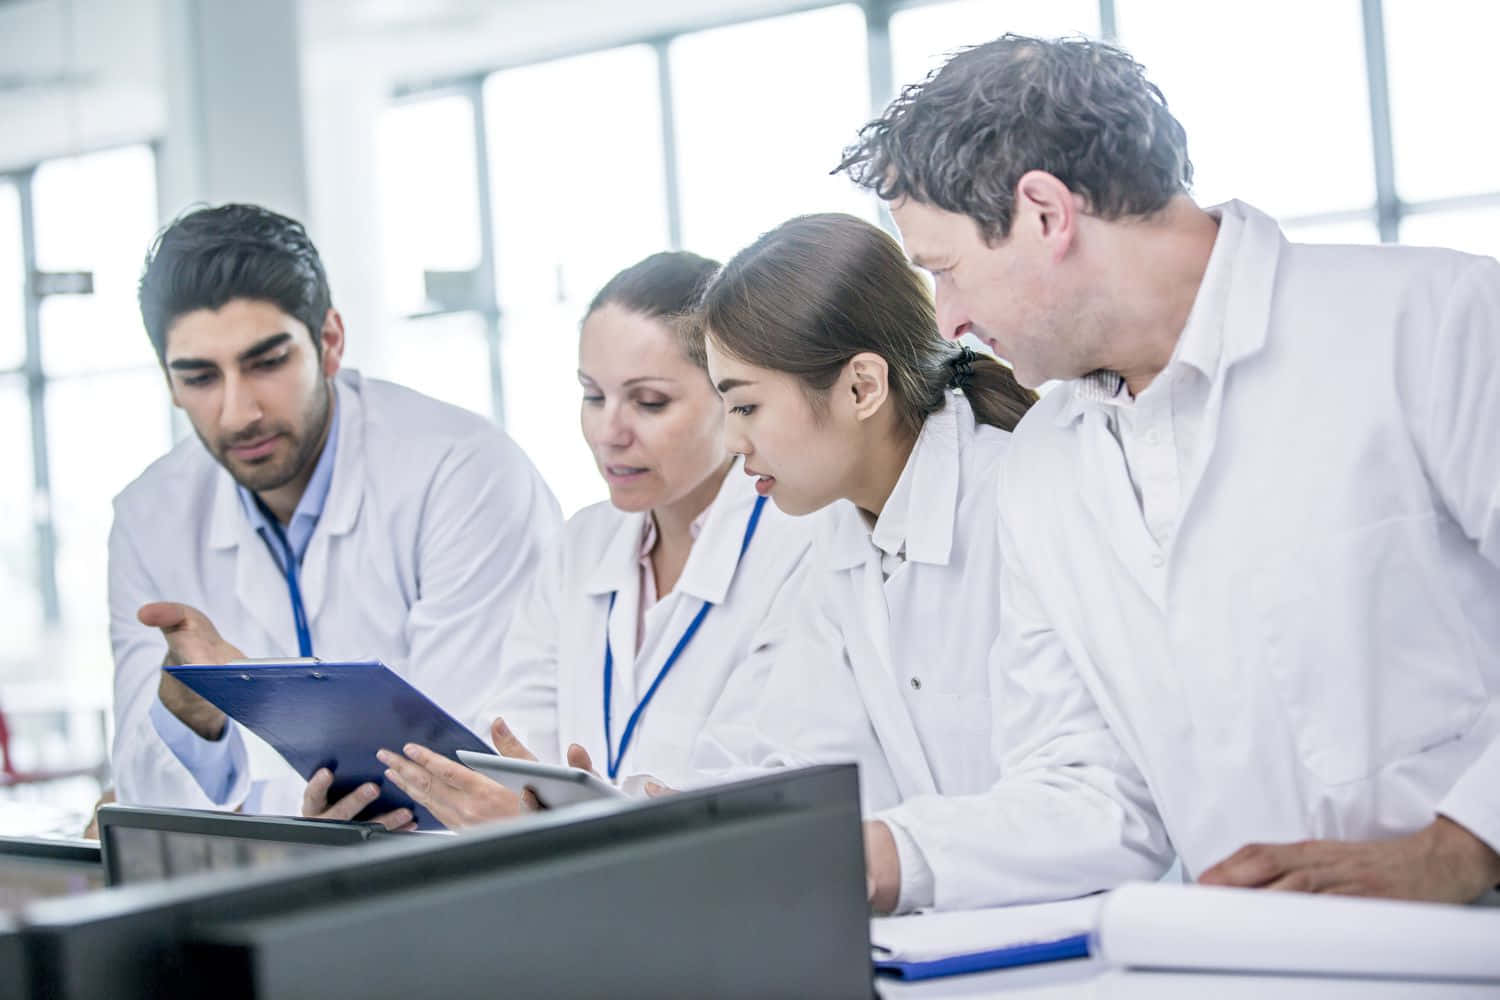 A Group Of People In Lab Coats Looking At A Tablet